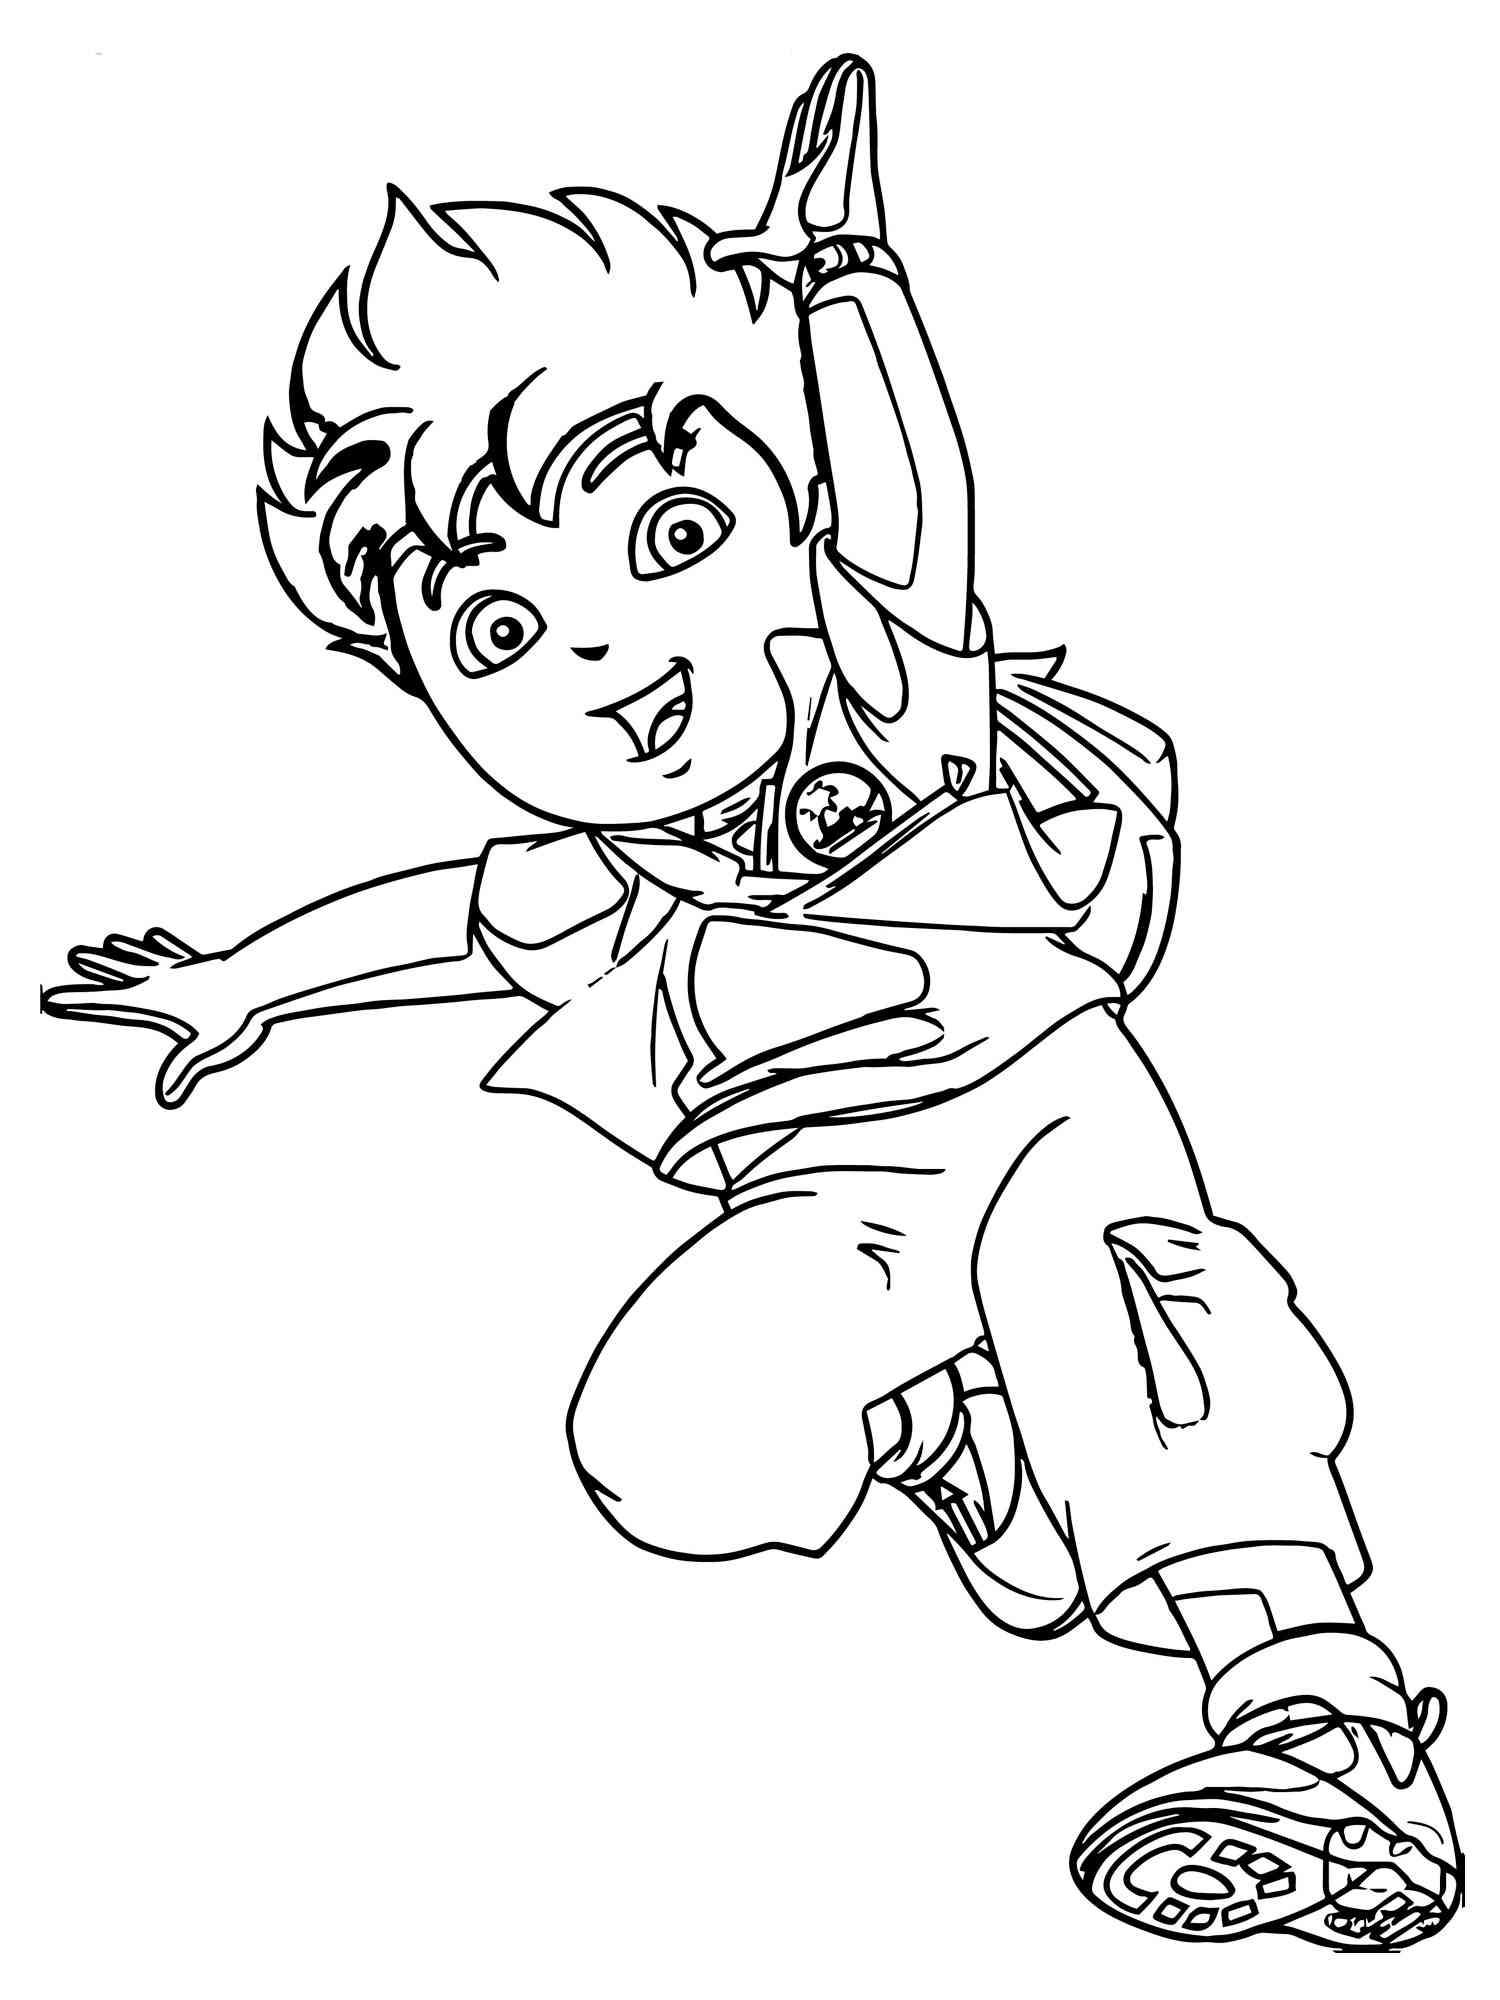 Diego 6 coloring page